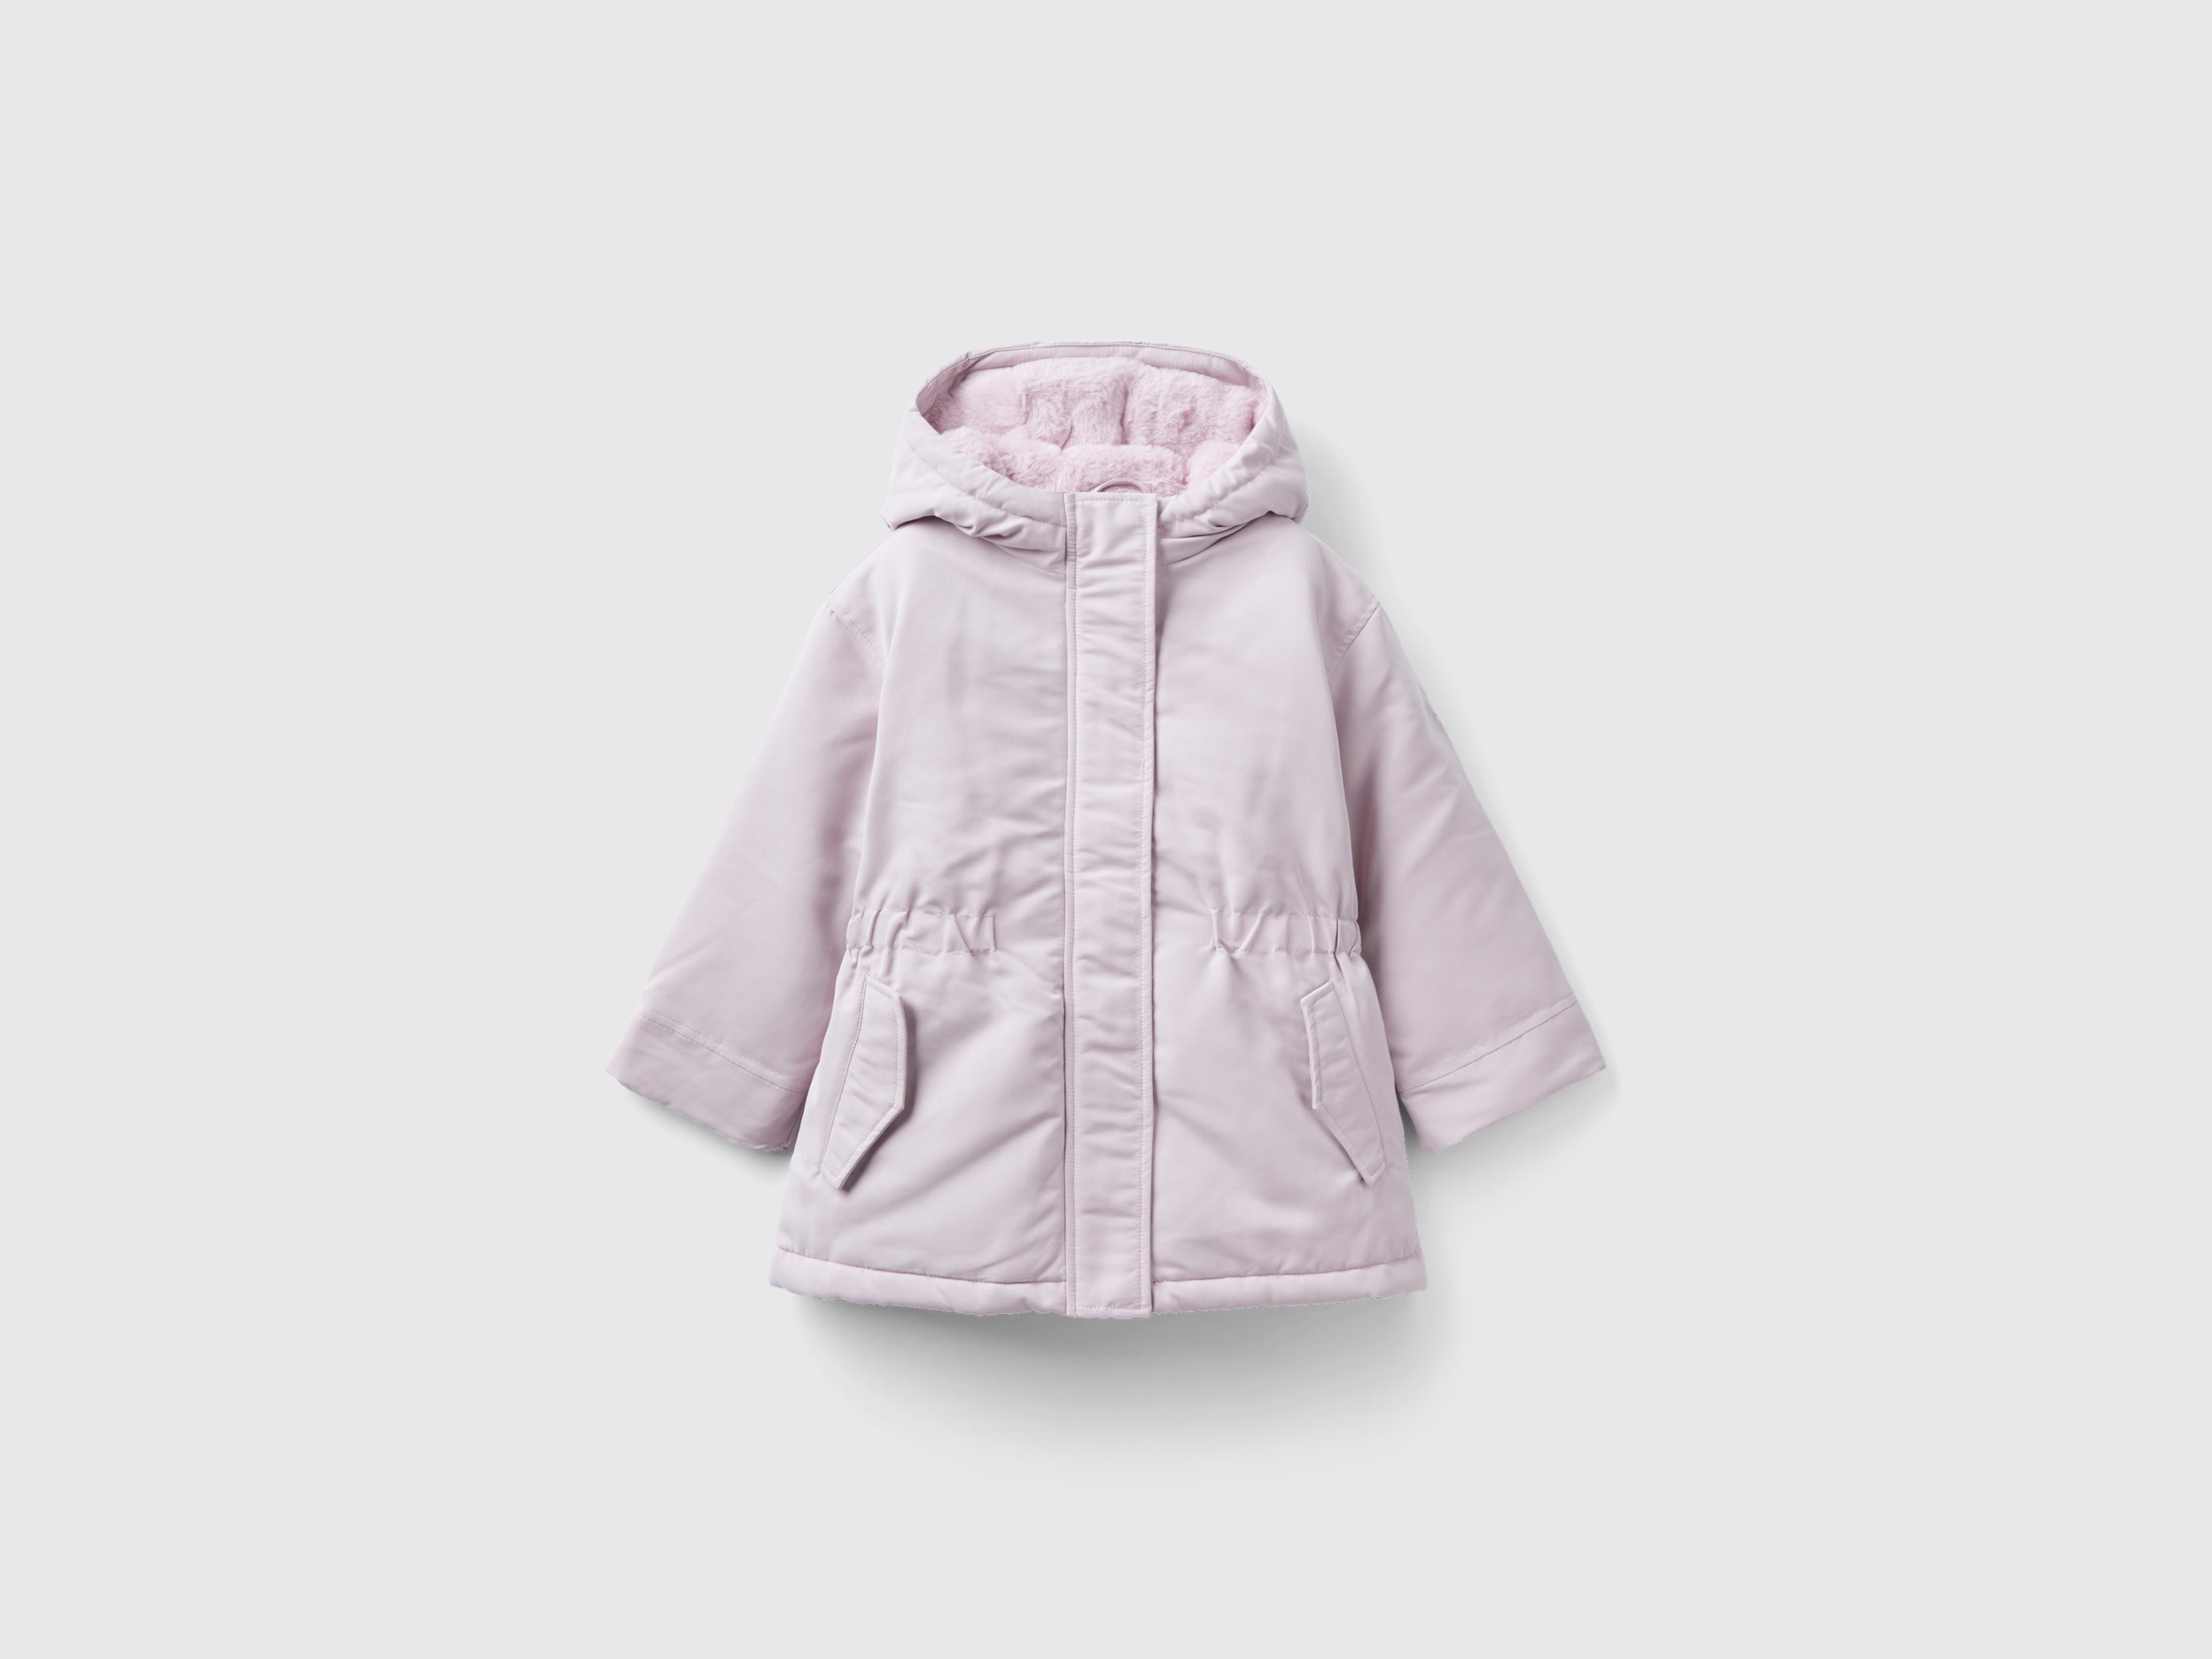 Benetton, Padded Parka With Drawstring, size 2-3, Pink, Kids